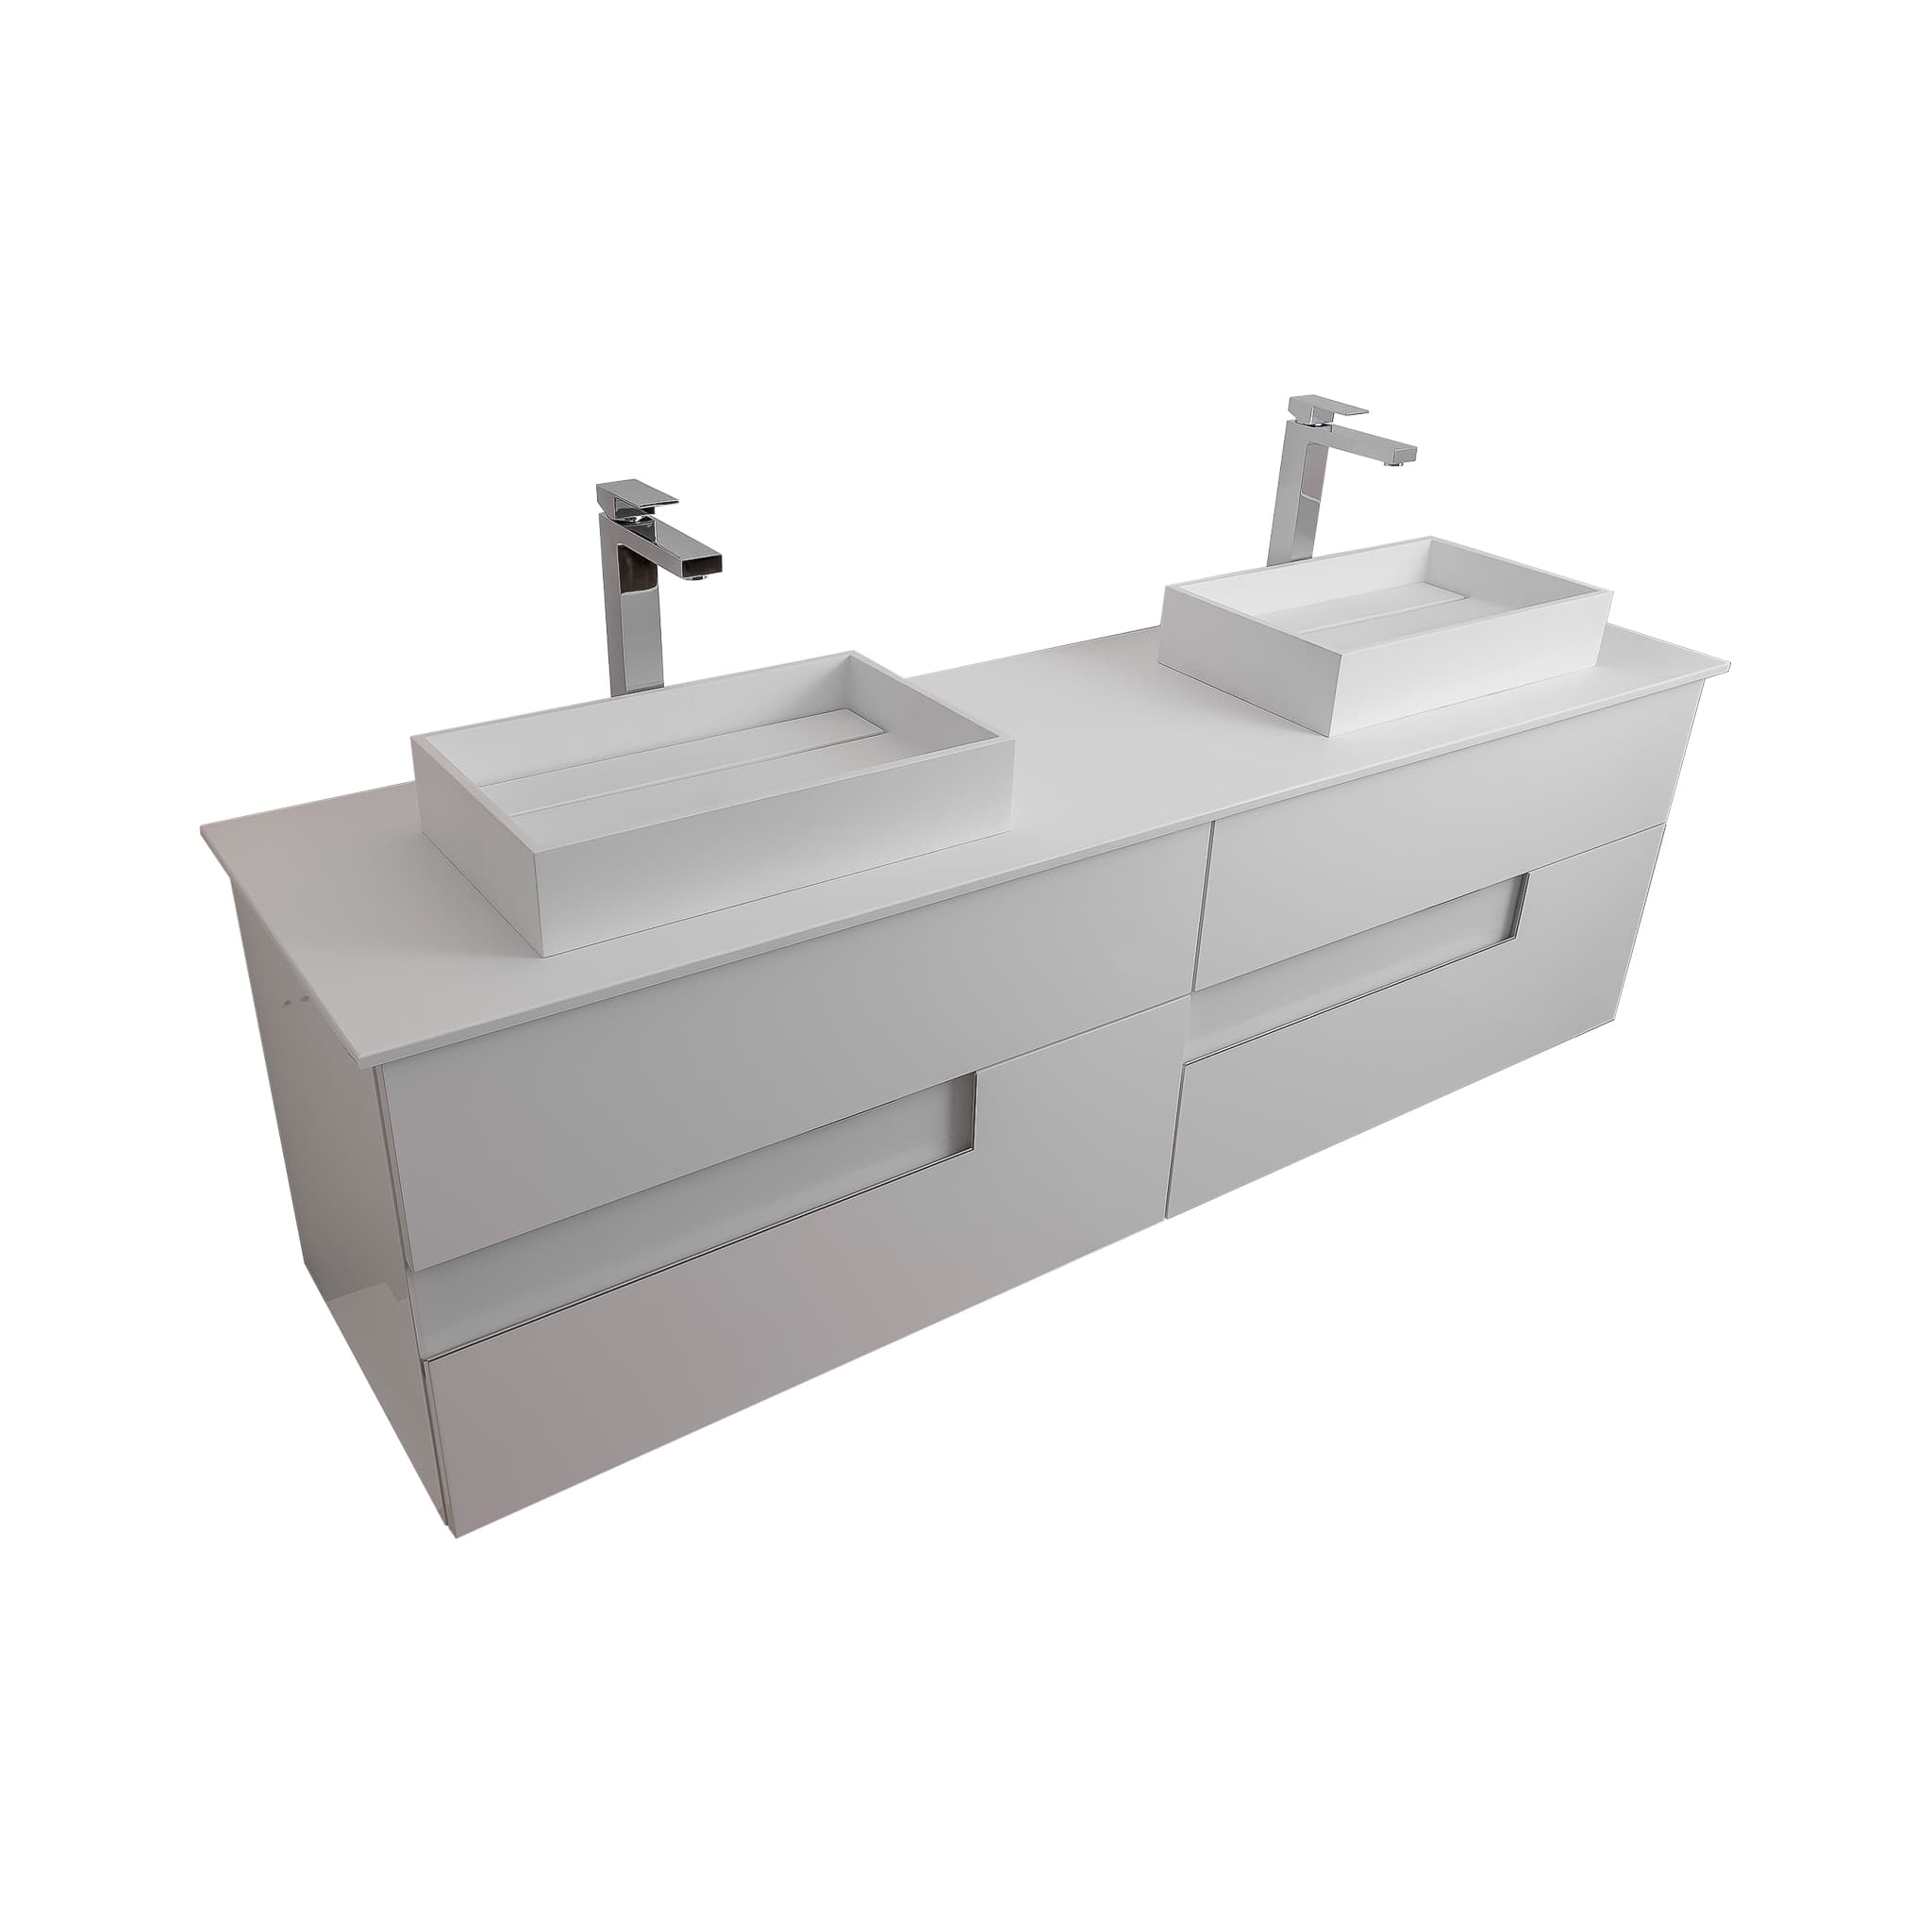 Vision 63 White High Gloss Cabinet, Solid Surface Flat White Counter And Two Infinity Square Solid Surface White Basin 1329, Wall Mounted Modern Vanity Set